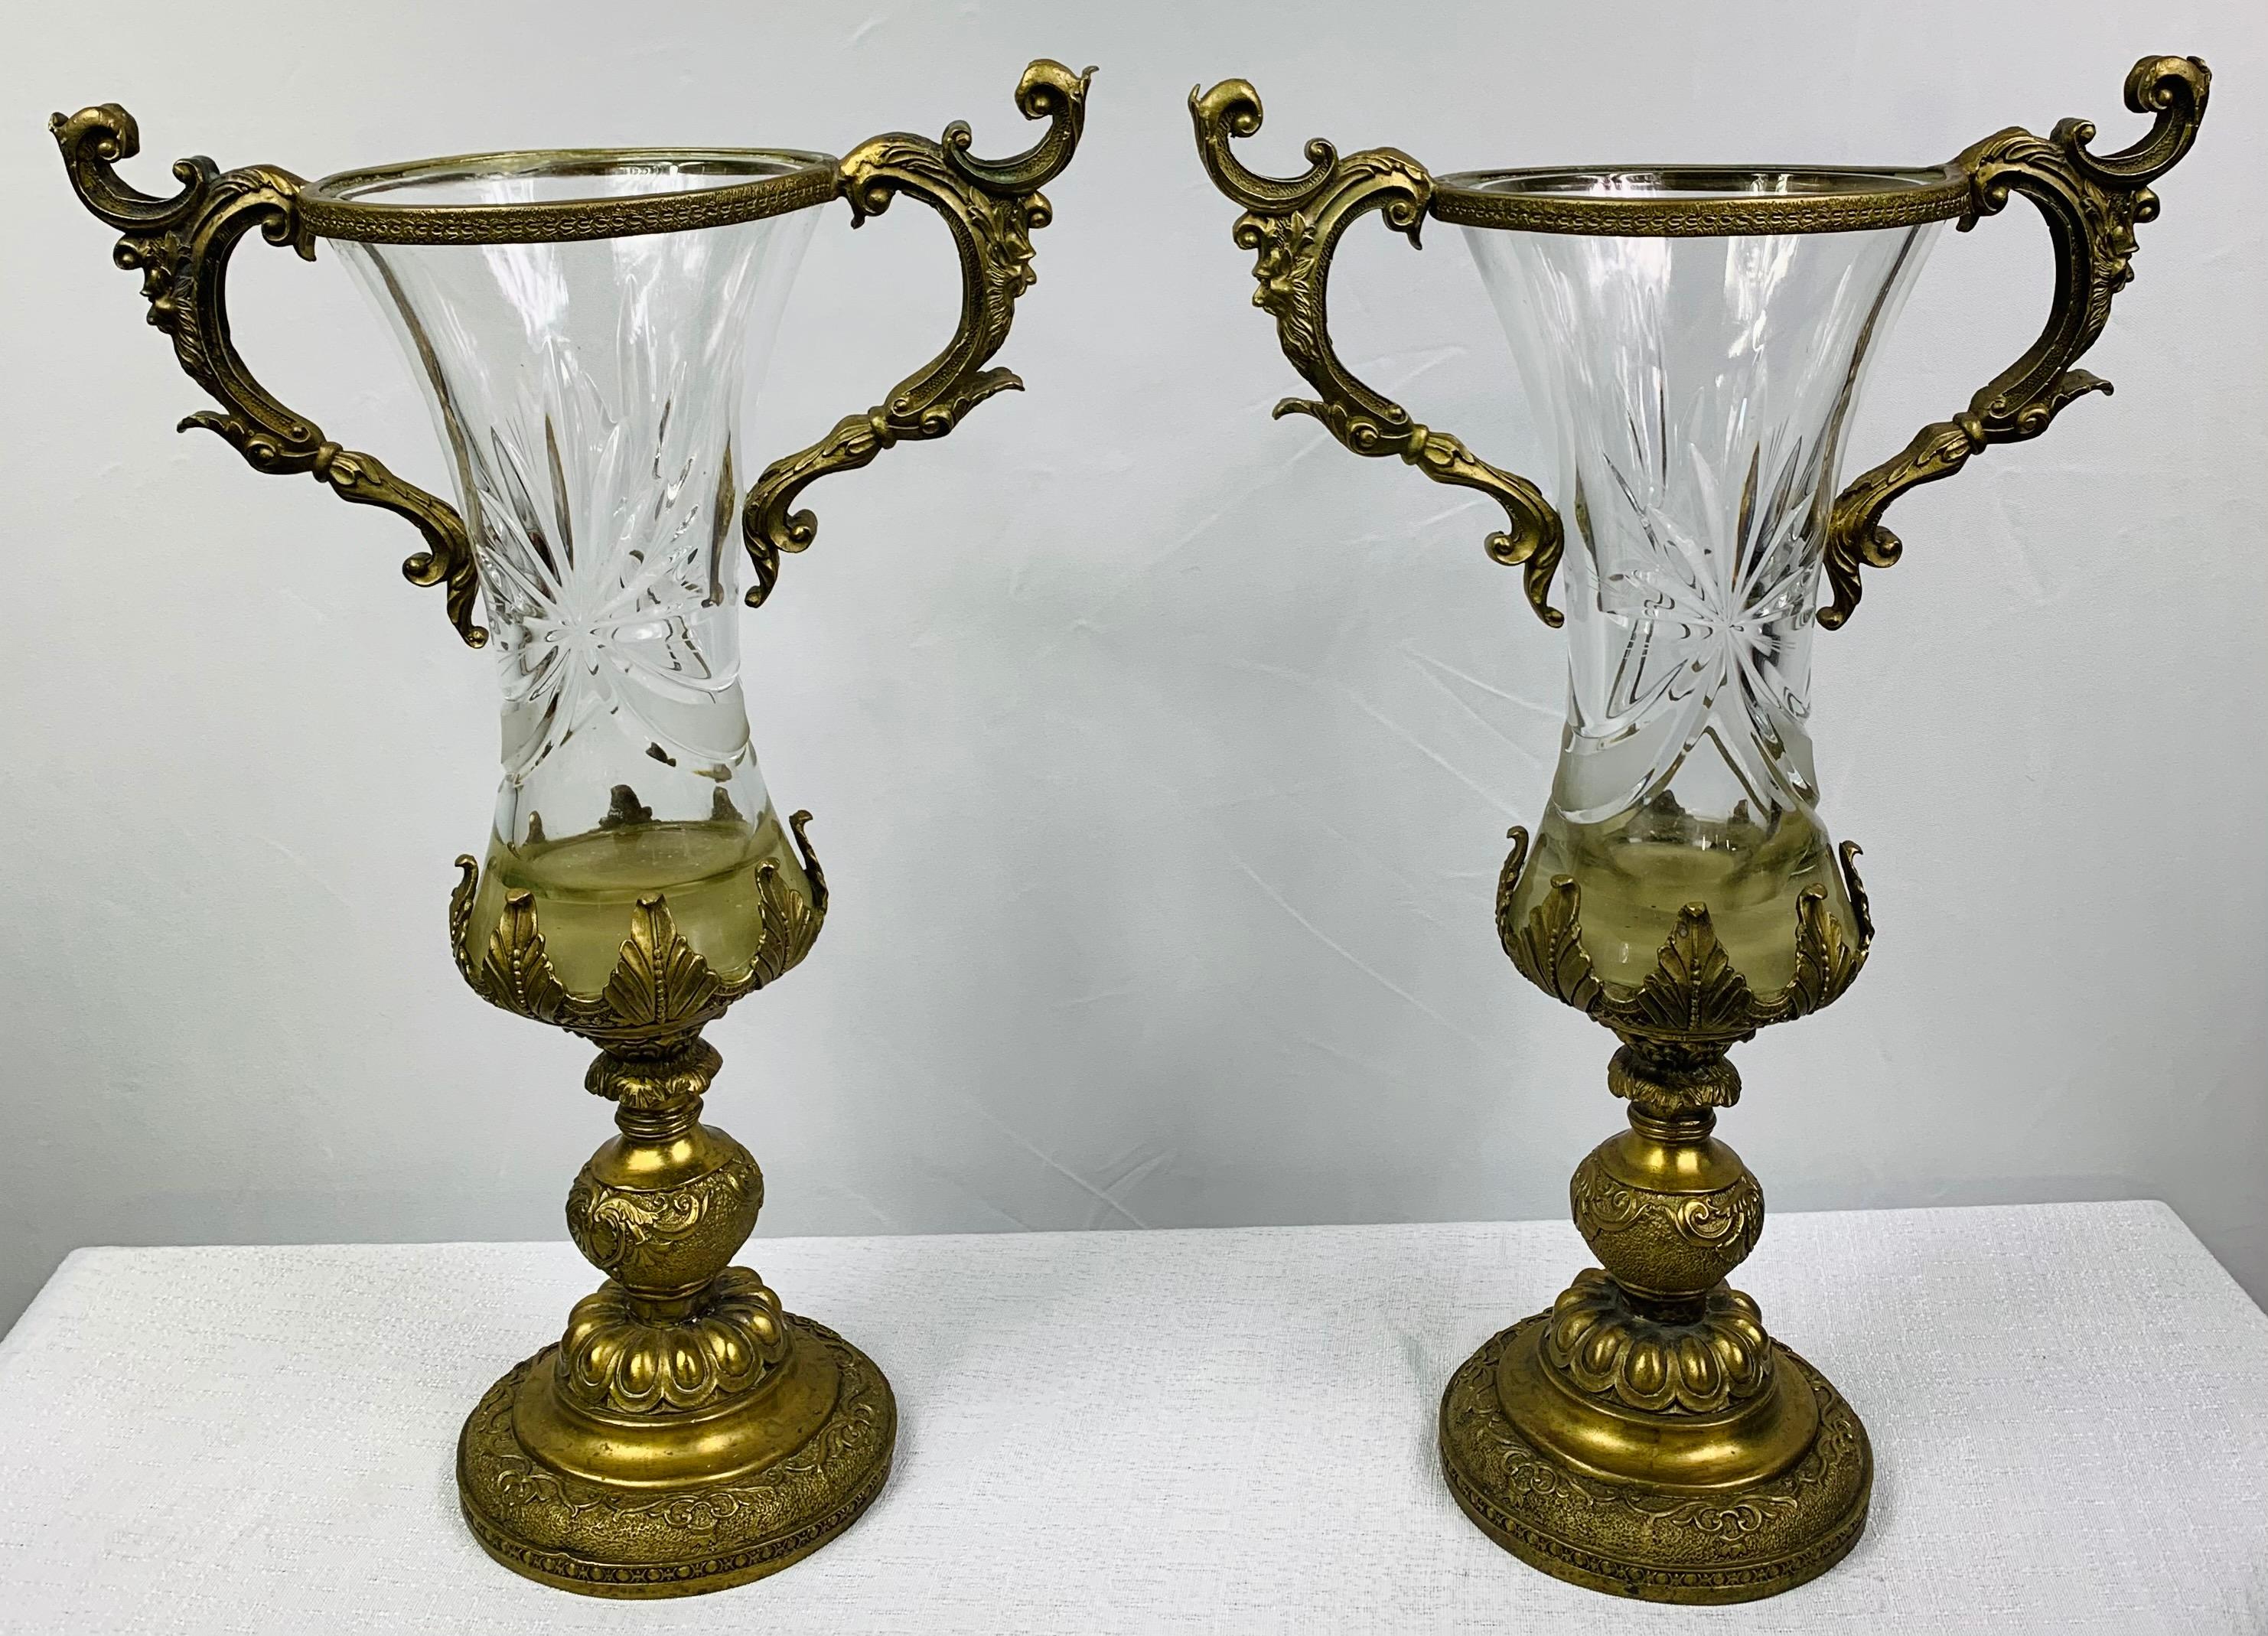 An exquisite pair of early 20th century bronze mounted and cut glass twin handle vases or urn in the manner of Baccarat. Each vase bodies are crafted of cut-glass and feature a round base. The handles, base and mouth is finely decorated in bronze